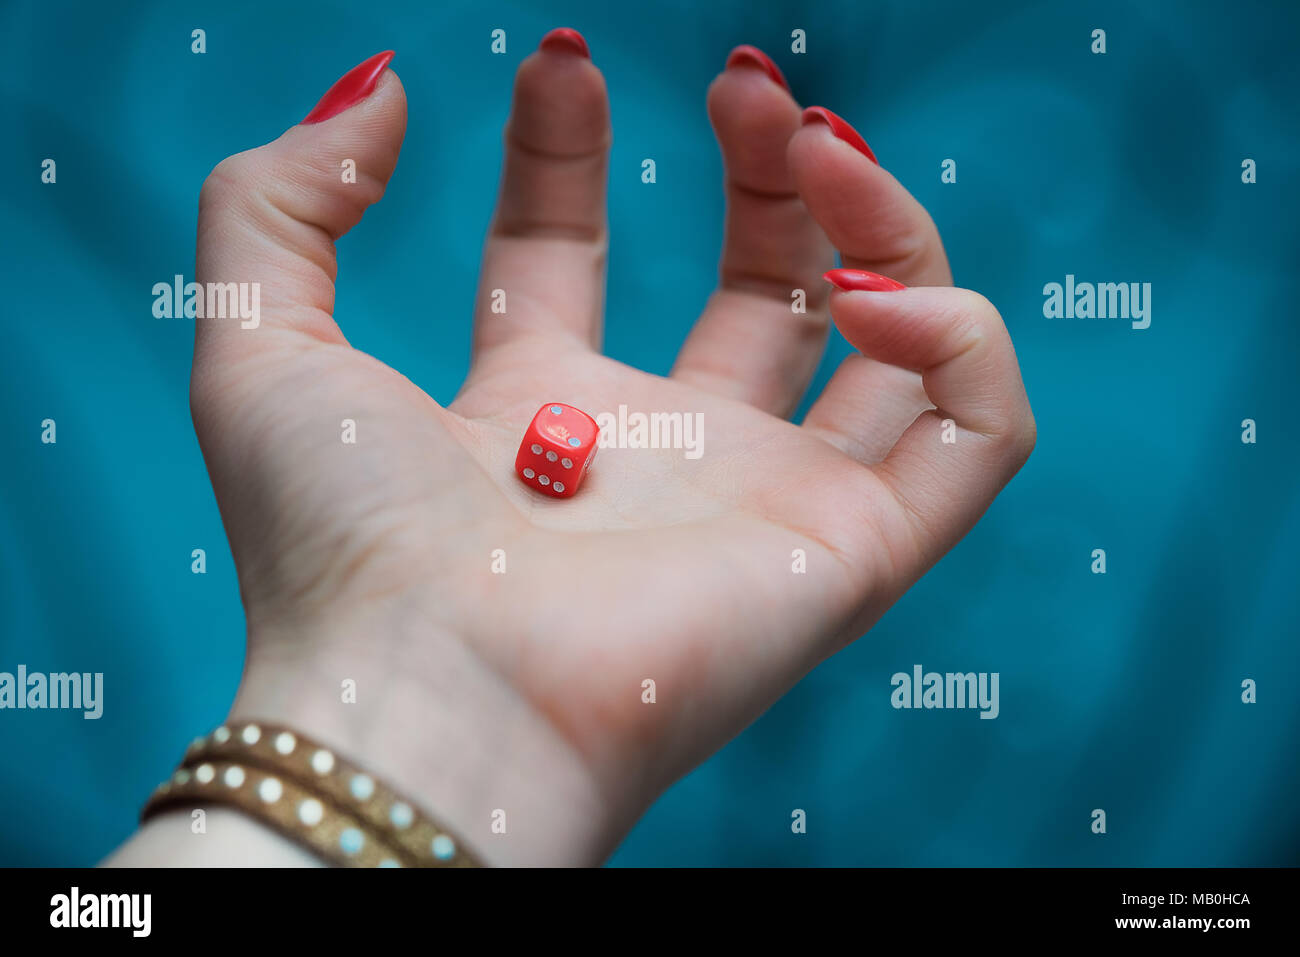 Red dice in woman’s hand at the blue backgroundrisk Stock Photo